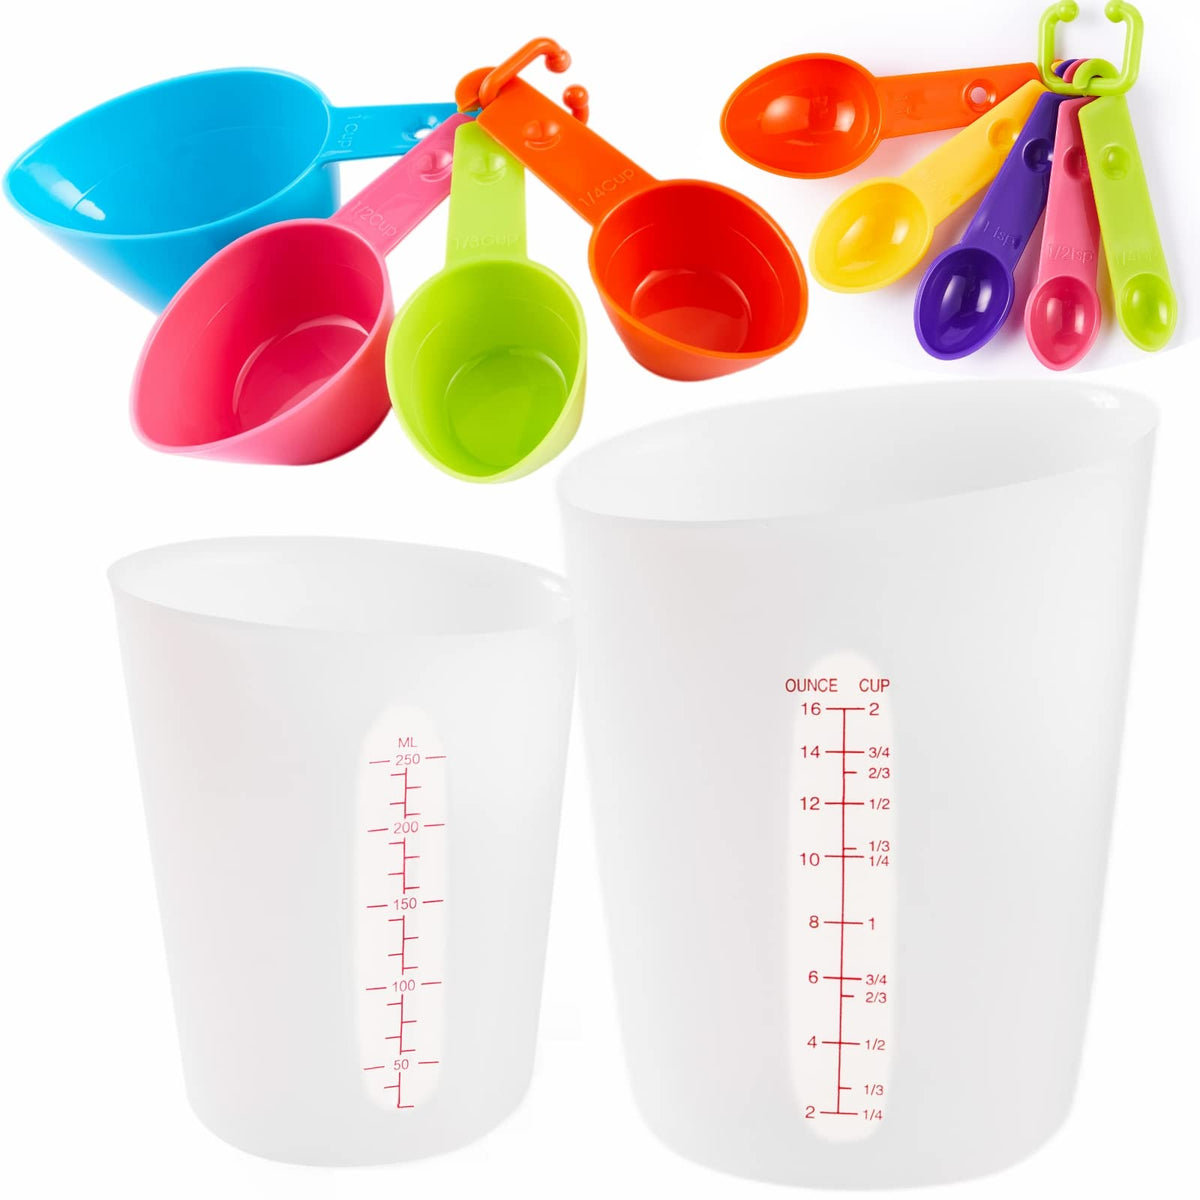 Pampered Chef Measuring Cups & Spoons Set 2257 - Durable Clear Plastic —  CHIMIYA